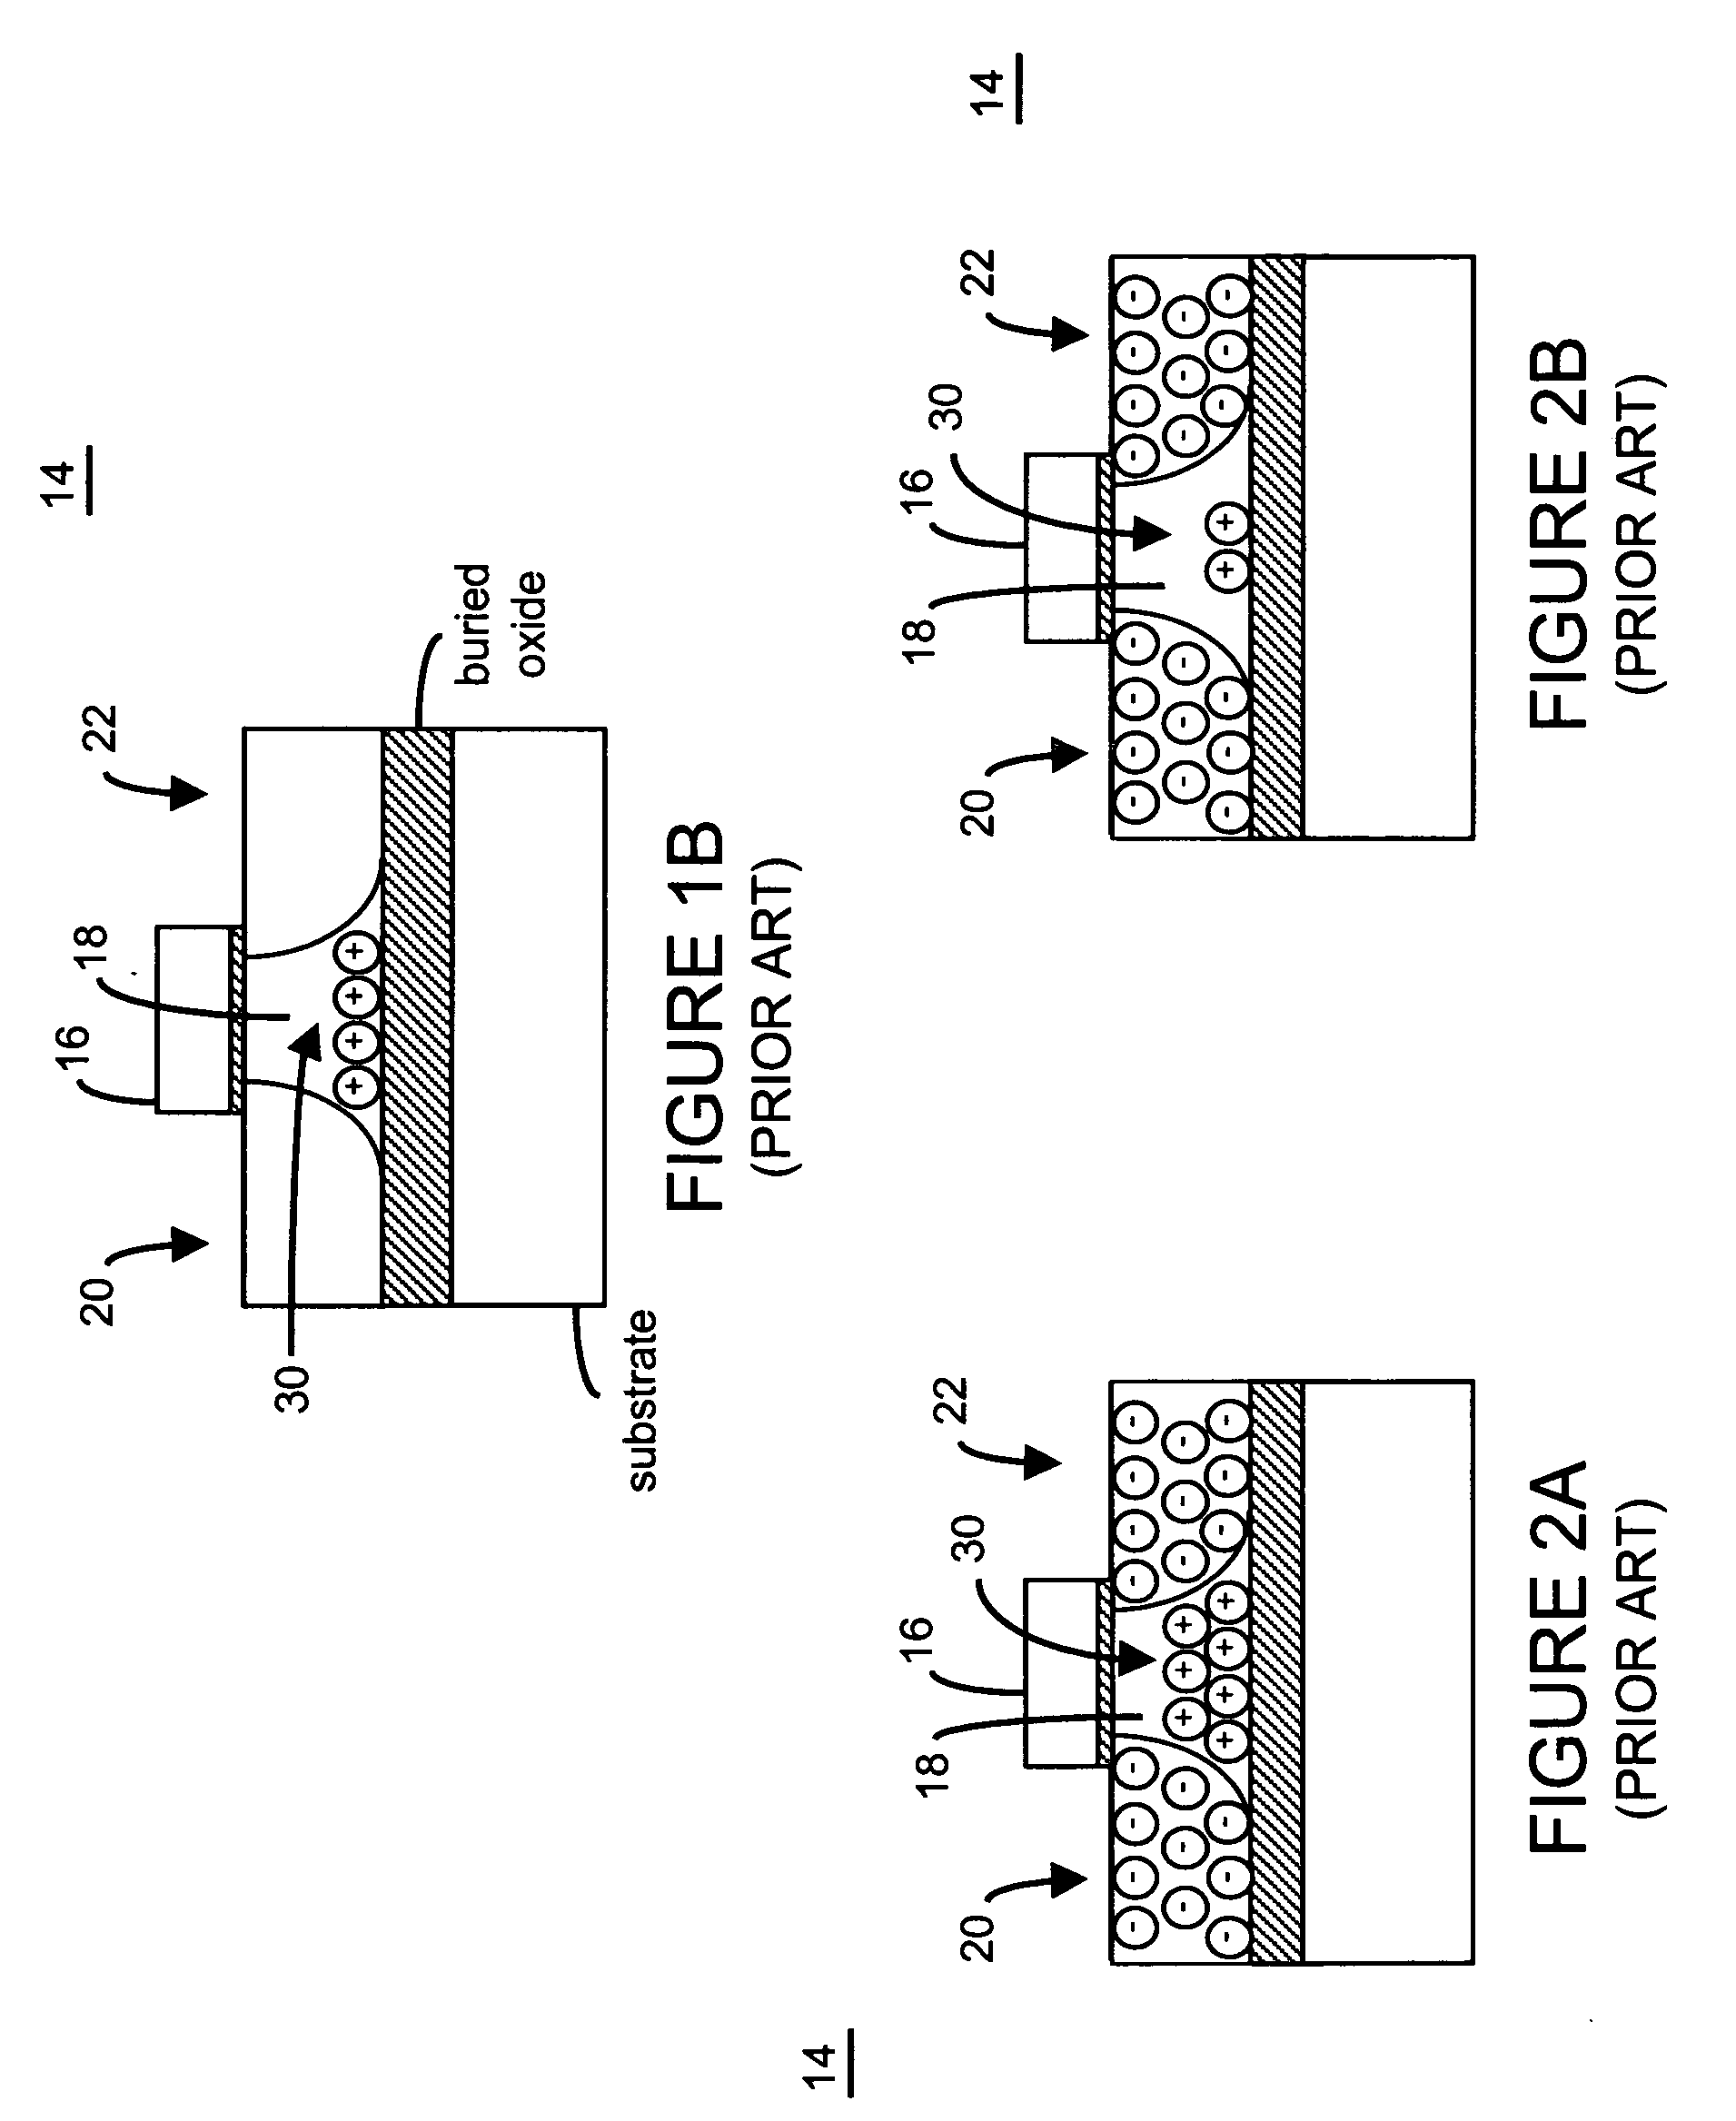 Semiconductor memory device and method of operating same